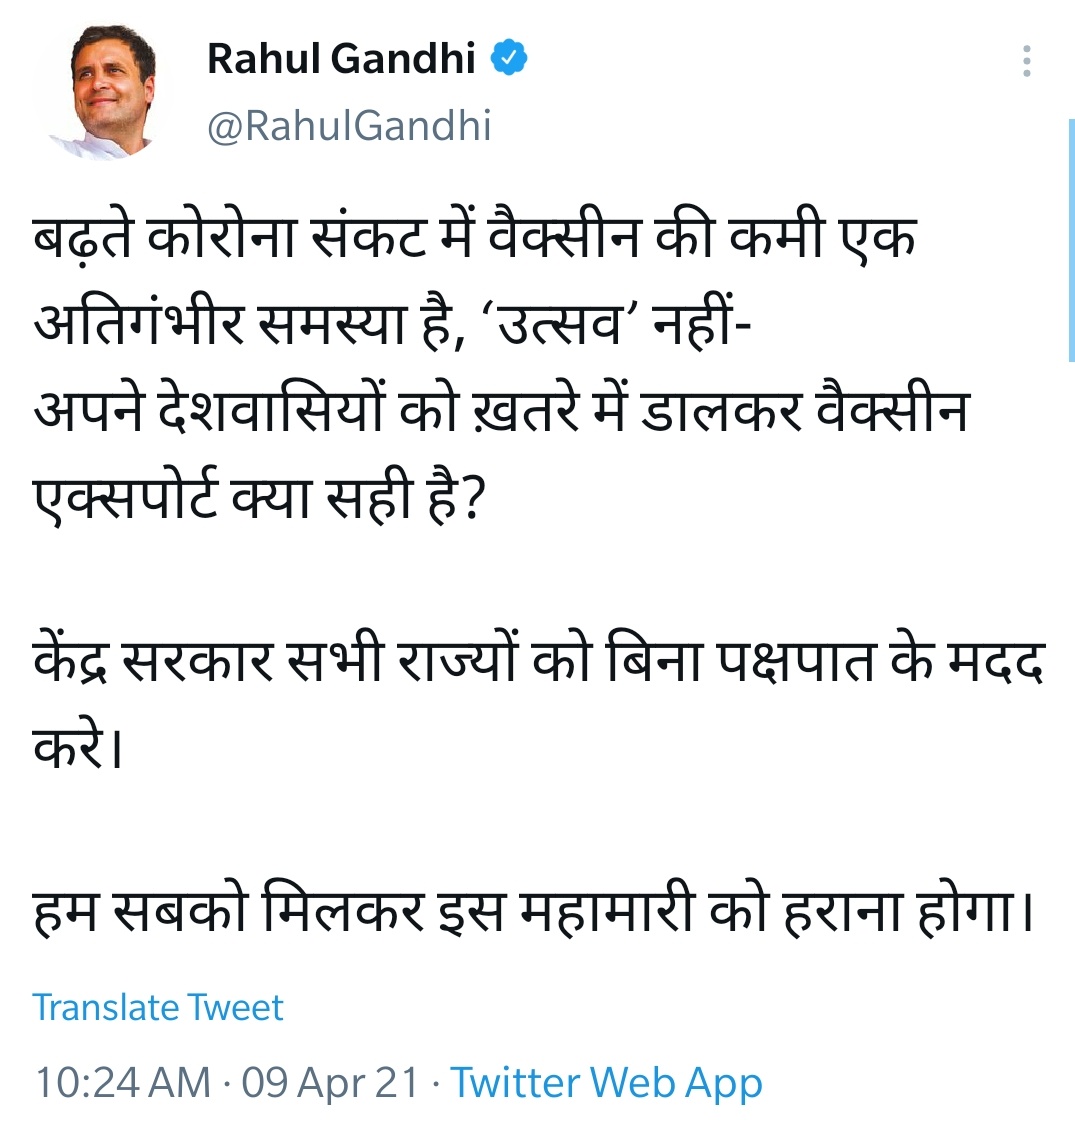 If  @RahulGandhi was PM, we wouldn't be celebrating our sorry situation with utsavs!